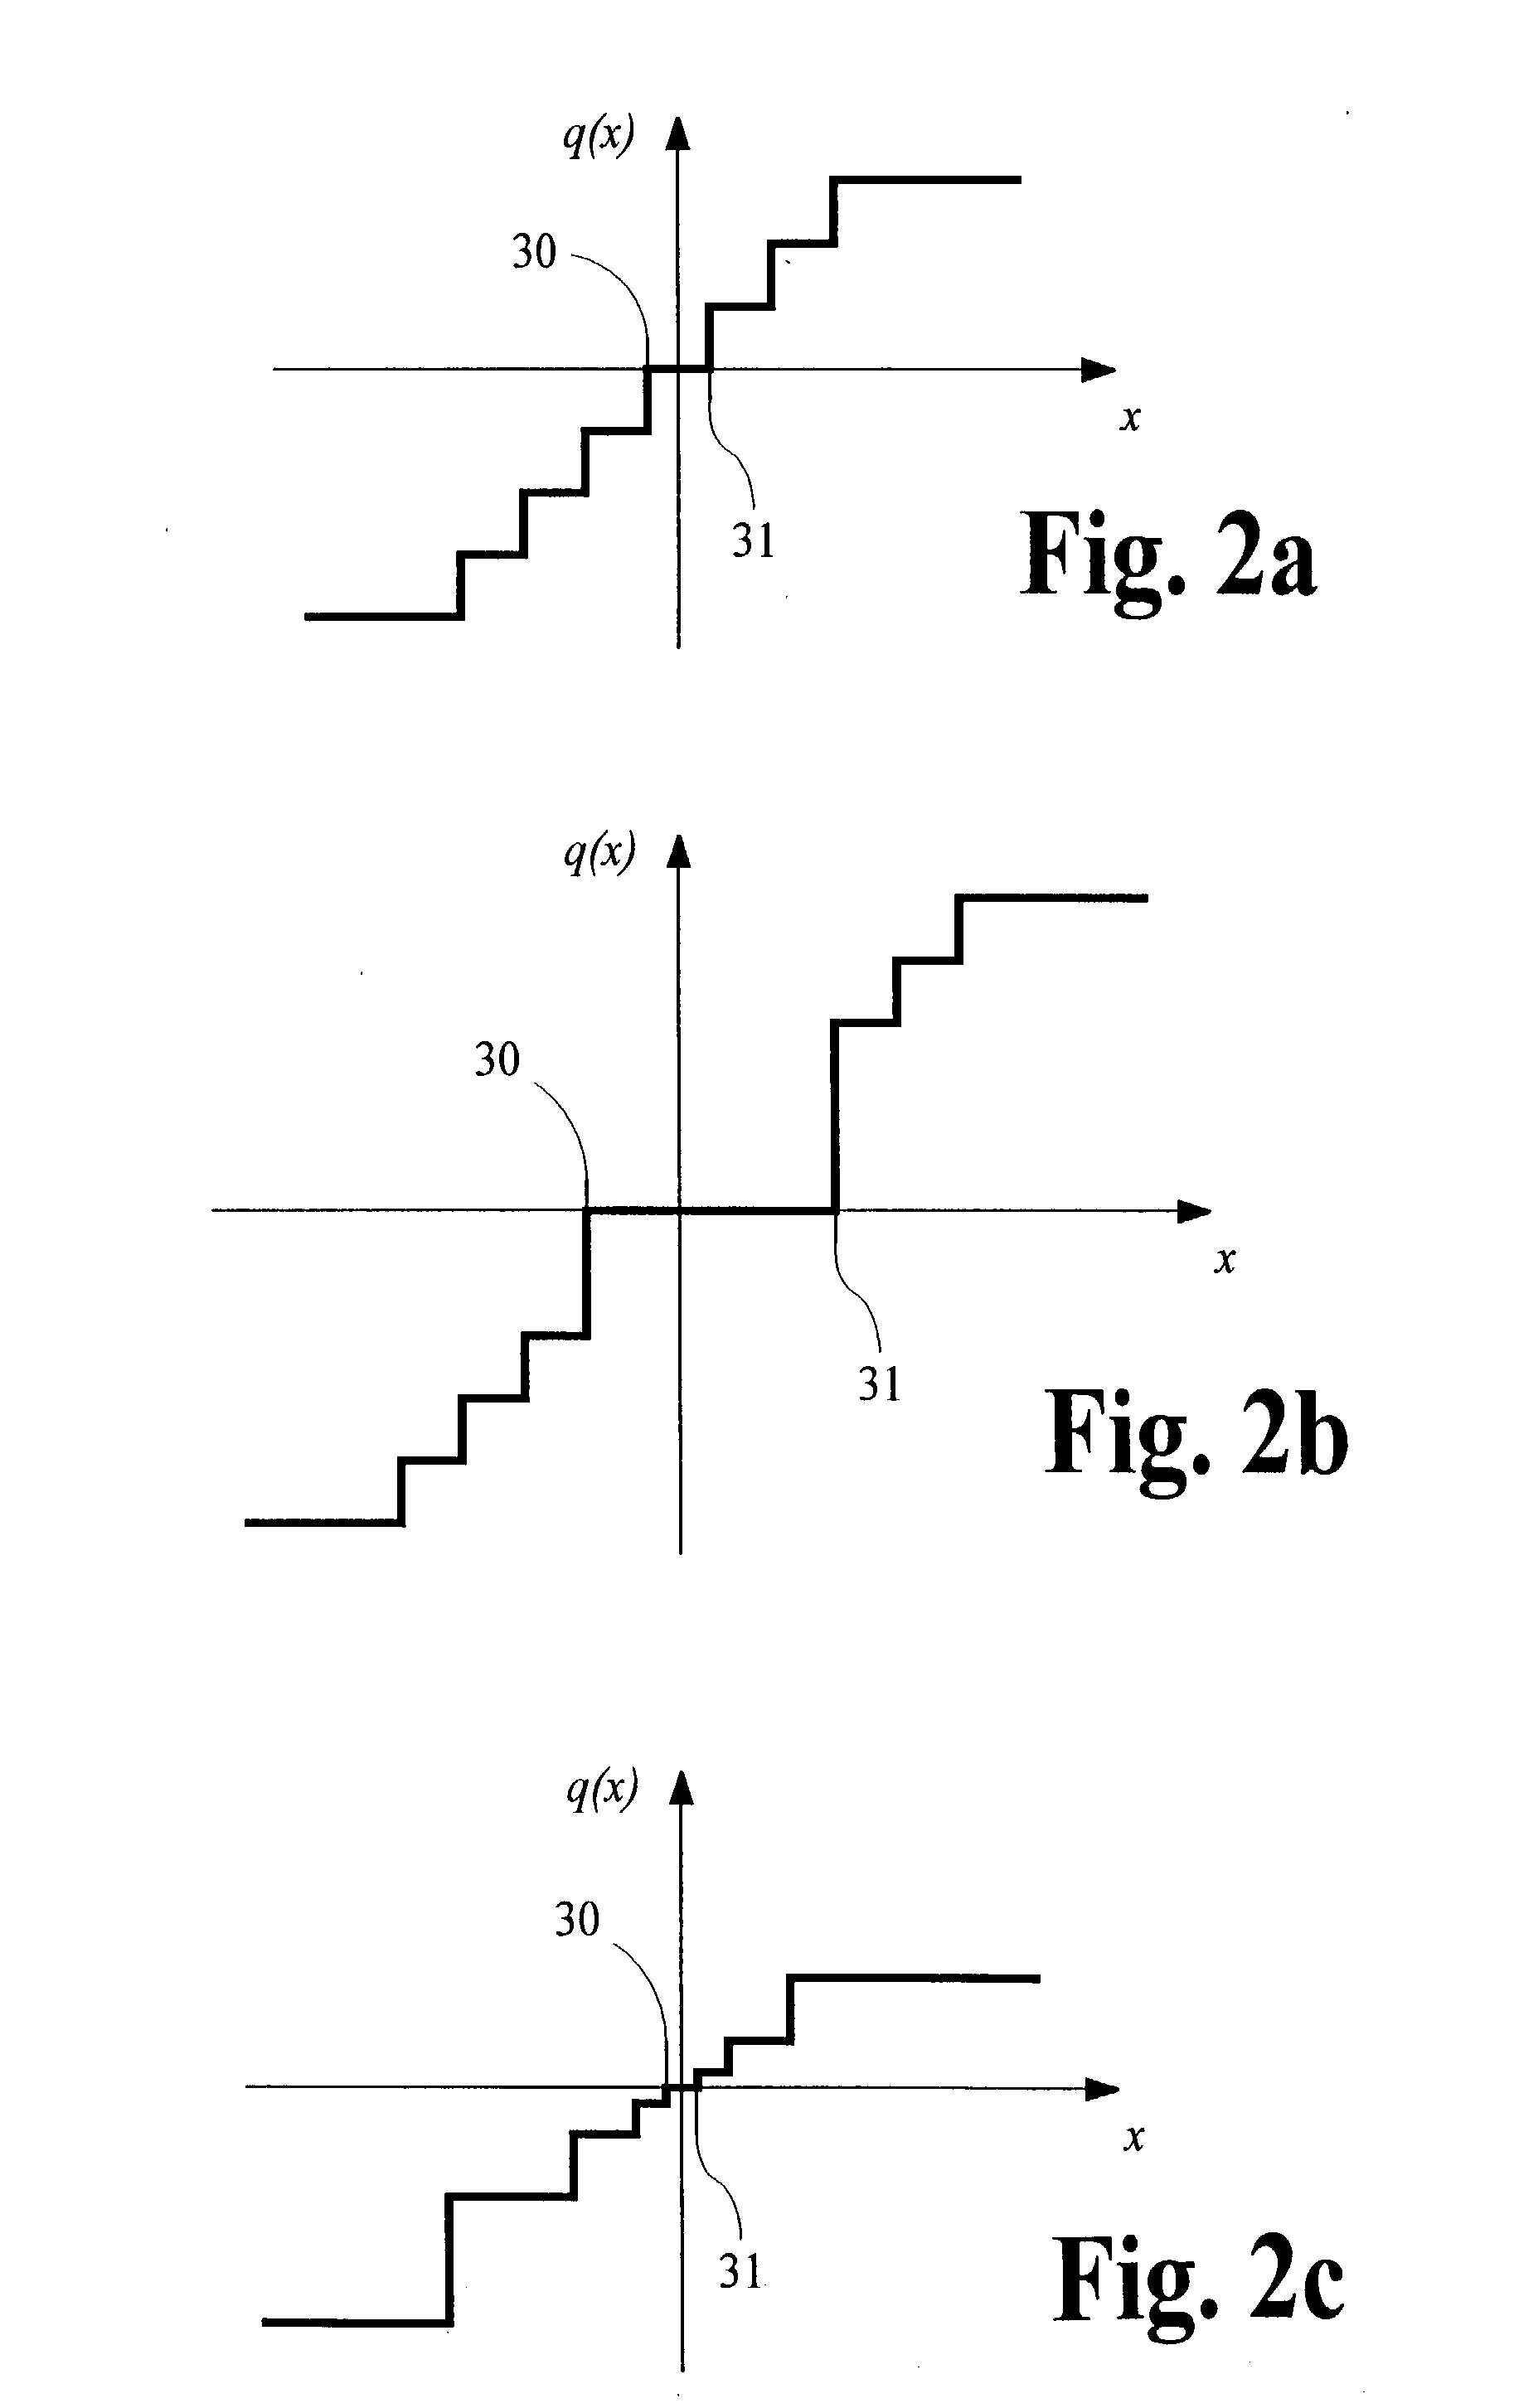 Audio coding system using spectral hole filling